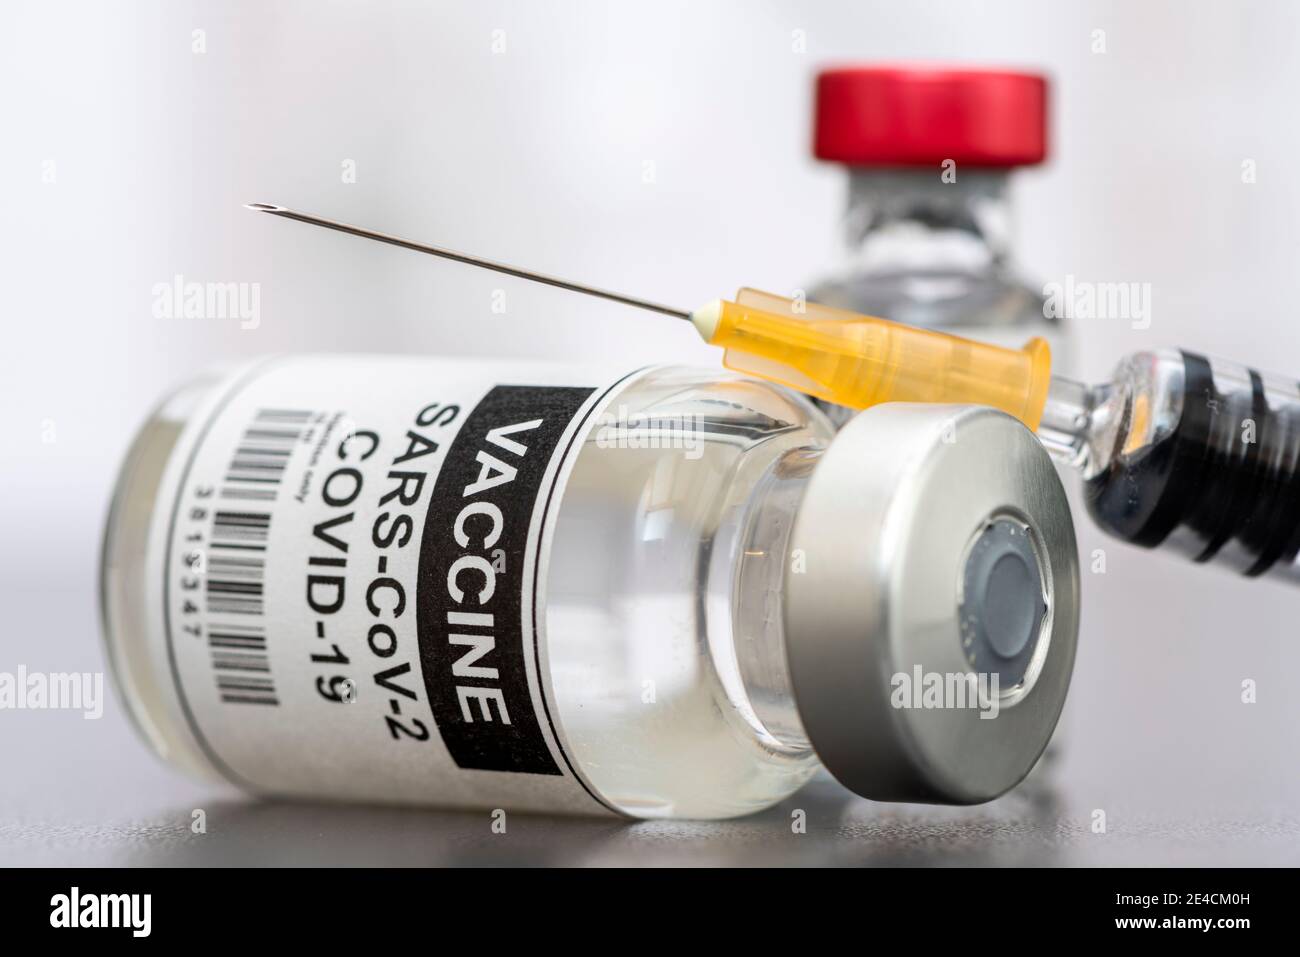 Vaccination against coronavirus with syringe and ampoule Stock Photo